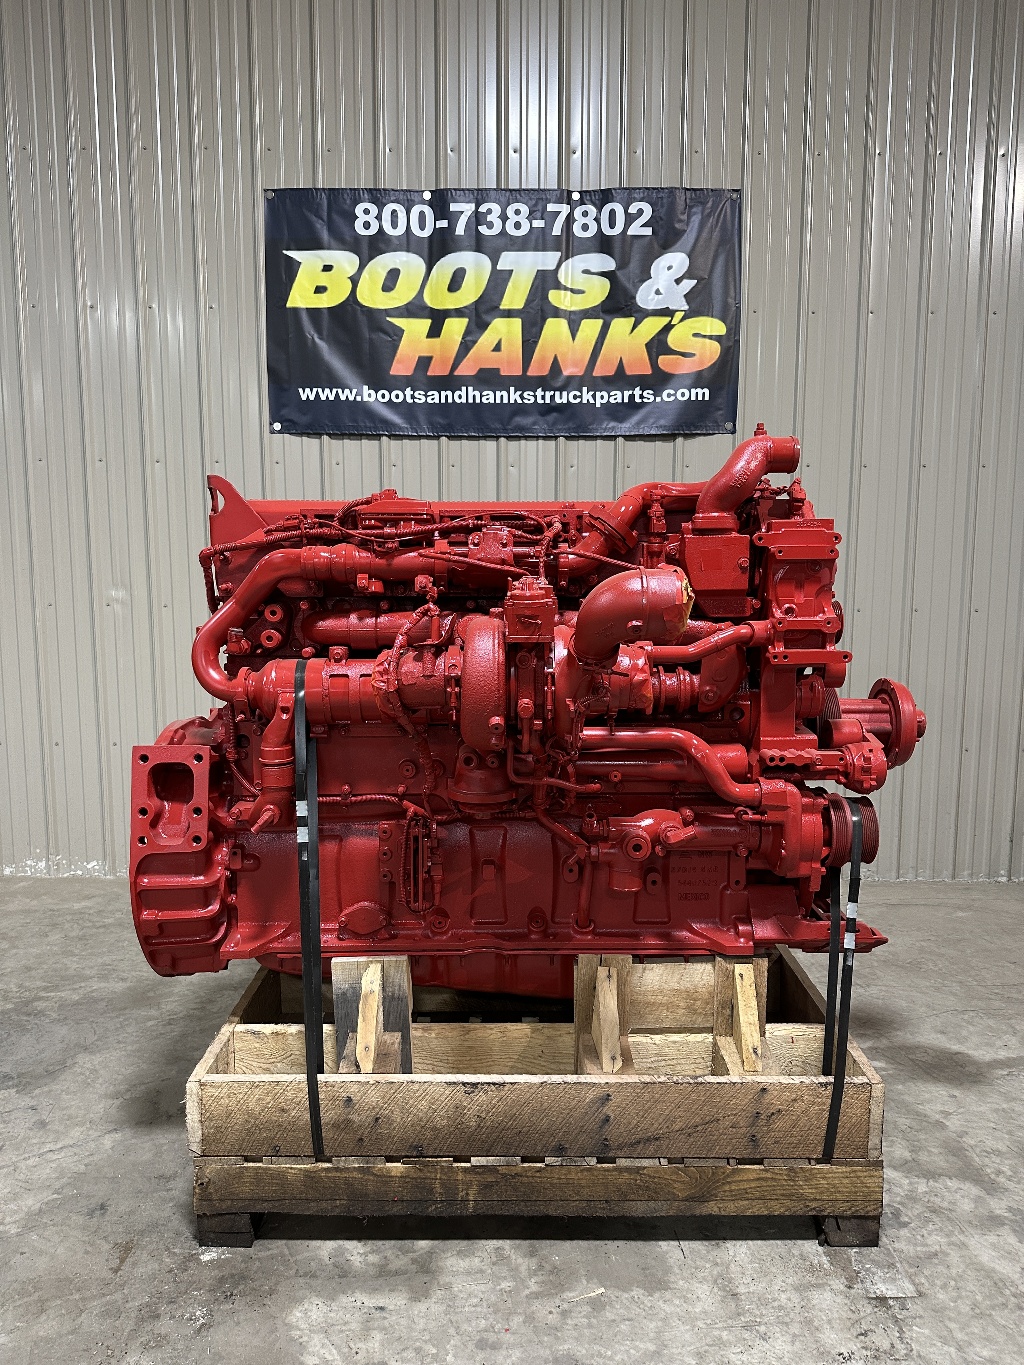 USED 2019 CUMMINS X15 COMPLETE ENGINE TRUCK PARTS #1974